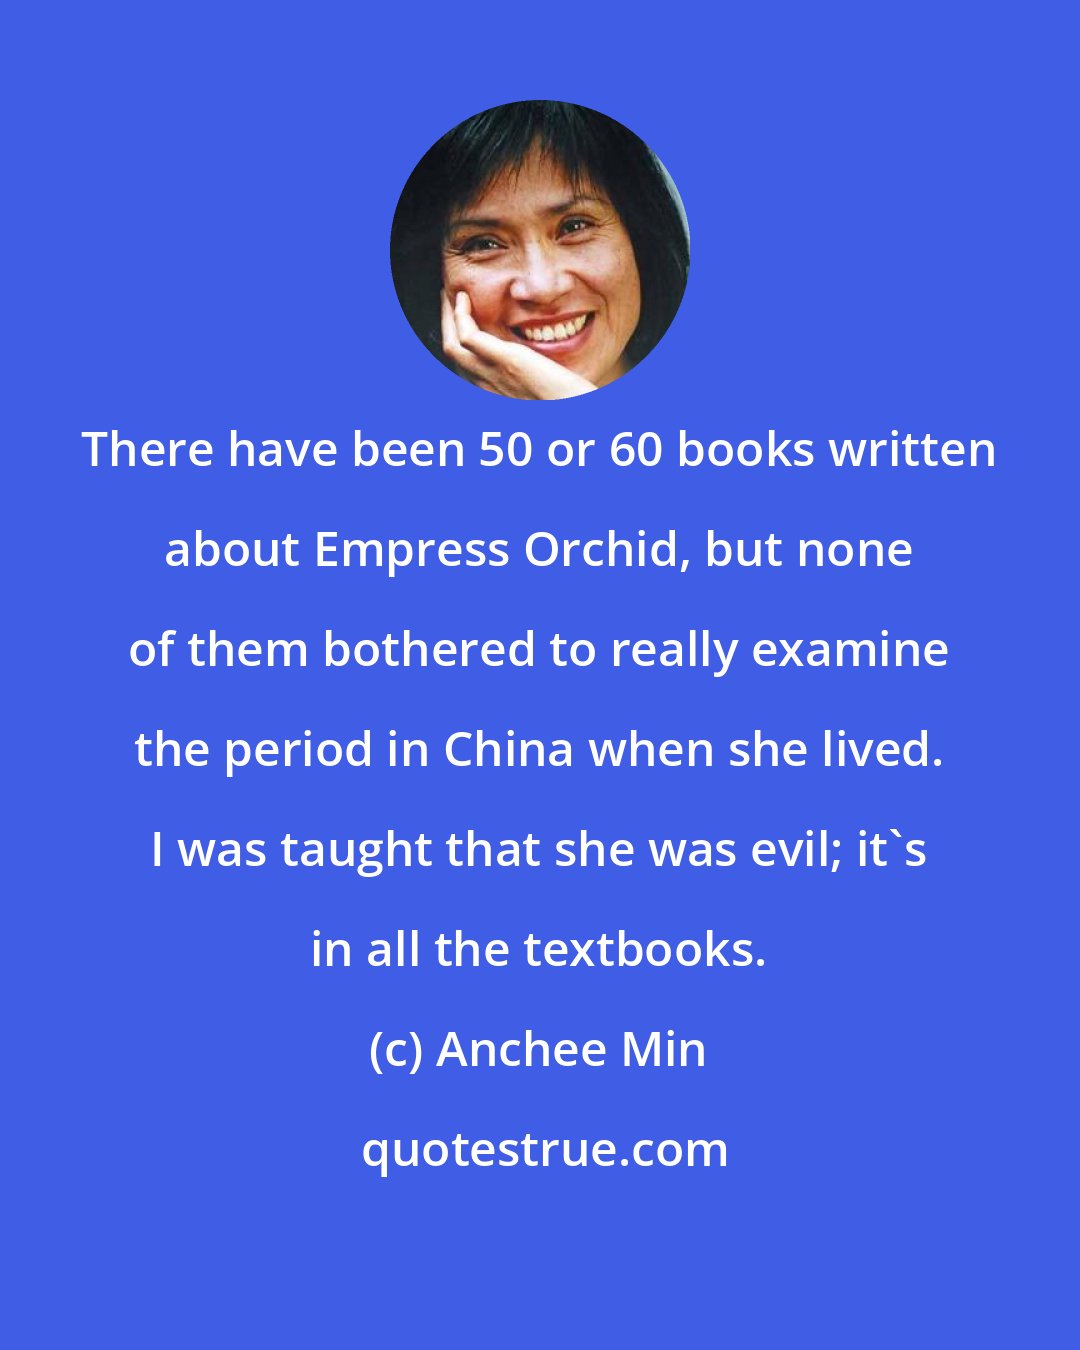 Anchee Min: There have been 50 or 60 books written about Empress Orchid, but none of them bothered to really examine the period in China when she lived. I was taught that she was evil; it's in all the textbooks.